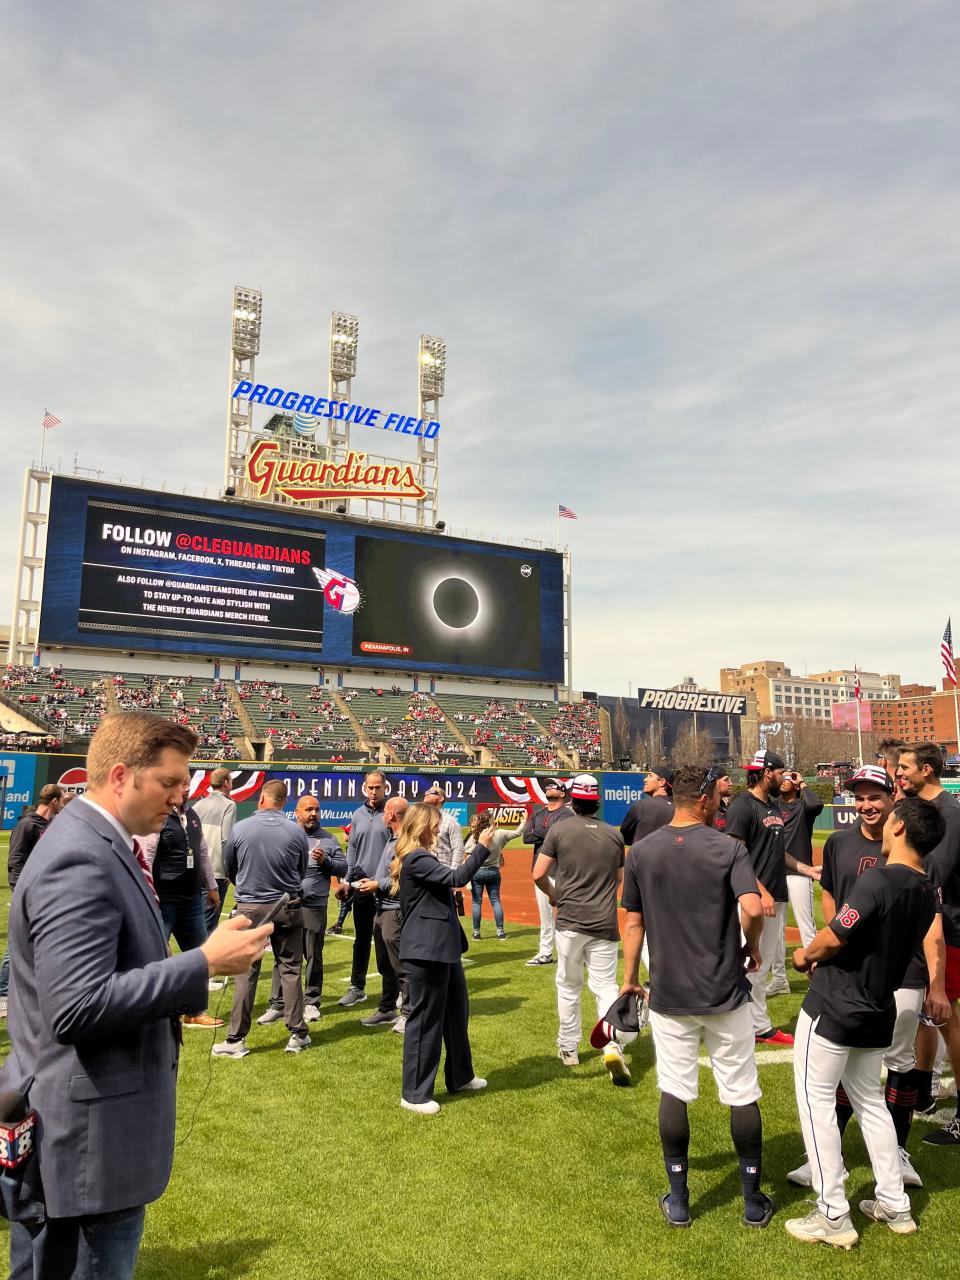 The screen at Progressive Field in Cleveland, Ohio, shows the eclipse happening in other cities.